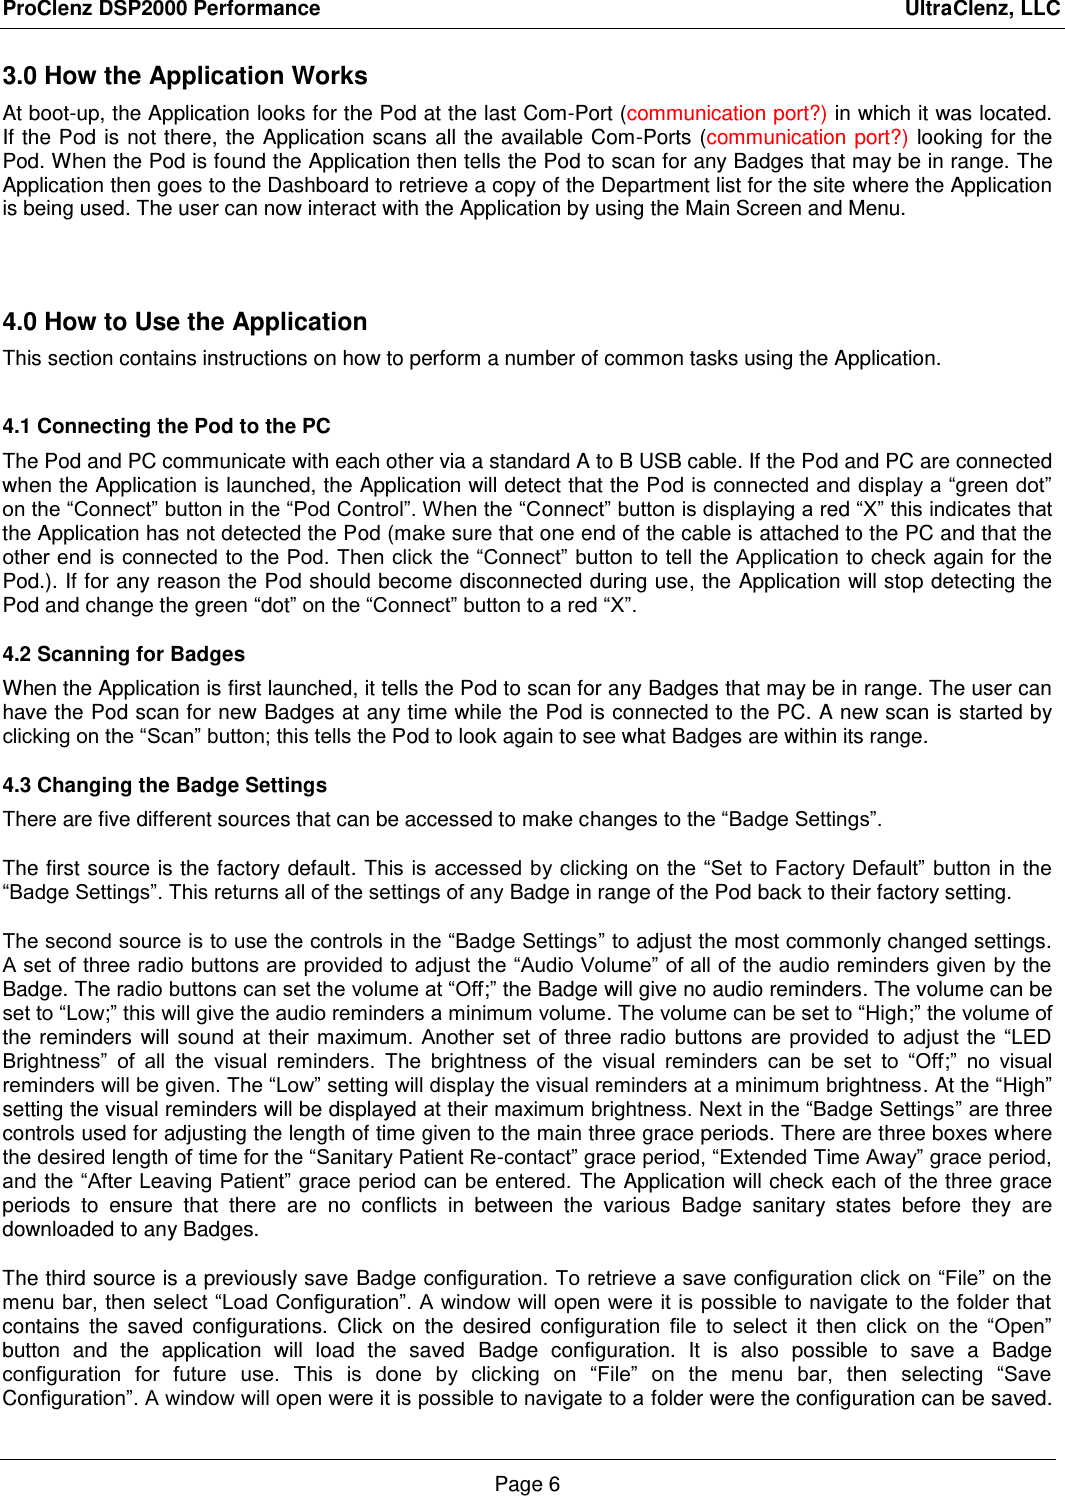 ProClenz DSP2000 Performance                                                                                                     UltraClenz, LLC Page 6 3.0 How the Application Works At boot-up, the Application looks for the Pod at the last Com-Port (communication port?) in which it was located.    If the Pod is not there, the Application scans all the available Com-Ports (communication port?) looking for the Pod. When the Pod is found the Application then tells the Pod to scan for any Badges that may be in range. The Application then goes to the Dashboard to retrieve a copy of the Department list for the site where the Application is being used. The user can now interact with the Application by using the Main Screen and Menu.  4.0 How to Use the Application  This section contains instructions on how to perform a number of common tasks using the Application.  4.1 Connecting the Pod to the PC The Pod and PC communicate with each other via a standard A to B USB cable. If the Pod and PC are connected when the Application is launched, the Application will detect that the Pod is connected and display a “green dot” on the “Connect” button in the “Pod Control”. When the “Connect” button is displaying a red “X” this indicates that the Application has not detected the Pod (make sure that one end of the cable is attached to the PC and that the other end is connected to the Pod. Then click the “Connect” button to tell the Application to check again for the Pod.). If for any reason the Pod should become disconnected during use, the Application will stop detecting the Pod and change the green “dot” on the “Connect” button to a red “X”. 4.2 Scanning for Badges When the Application is first launched, it tells the Pod to scan for any Badges that may be in range. The user can have the Pod scan for new Badges at any time while the Pod is connected to the PC. A new scan is started by clicking on the “Scan” button; this tells the Pod to look again to see what Badges are within its range. 4.3 Changing the Badge Settings There are five different sources that can be accessed to make changes to the “Badge Settings”. The first source is the factory default. This is accessed by clicking on  the “Set  to Factory Default” button in the “Badge Settings”. This returns all of the settings of any Badge in range of the Pod back to their factory setting. The second source is to use the controls in the “Badge Settings” to adjust the most commonly changed settings. A set of three radio buttons are provided to adjust the “Audio Volume” of all of the audio reminders given by the Badge. The radio buttons can set the volume at “Off;” the Badge will give no audio reminders. The volume can be set to “Low;” this will give the audio reminders a minimum volume. The volume can be set to “High;” the volume of the reminders will sound  at  their  maximum.  Another  set  of  three  radio  buttons  are  provided  to  adjust  the  “LED Brightness”  of  all the  visual  reminders.  The  brightness  of  the  visual  reminders  can  be  set  to  “Off;”  no  visual reminders will be given. The “Low” setting will display the visual reminders at a minimum brightness. At the “High” setting the visual reminders will be displayed at their maximum brightness. Next in the “Badge Settings” are three controls used for adjusting the length of time given to the main three grace periods. There are three boxes where the desired length of time for the “Sanitary Patient Re-contact” grace period, “Extended Time Away” grace period, and the “After Leaving Patient” grace period can be entered. The Application will check each of the three grace periods  to  ensure  that  there  are  no  conflicts  in  between  the  various  Badge  sanitary  states  before  they  are downloaded to any Badges. The third source is a previously save Badge configuration. To retrieve a save configuration click on “File” on the menu bar, then select “Load Configuration”. A window will open were it is possible to navigate to the folder that contains  the saved  configurations.  Click  on  the  desired  configuration  file  to  select  it  then  click  on  the  “Open” button  and  the  application  will  load  the  saved  Badge  configuration.  It  is  also  possible  to  save  a  Badge configuration  for  future  use.  This  is  done  by  clicking  on  “File”  on  the  menu  bar,  then  selecting  “Save Configuration”. A window will open were it is possible to navigate to a folder were the configuration can be saved. 